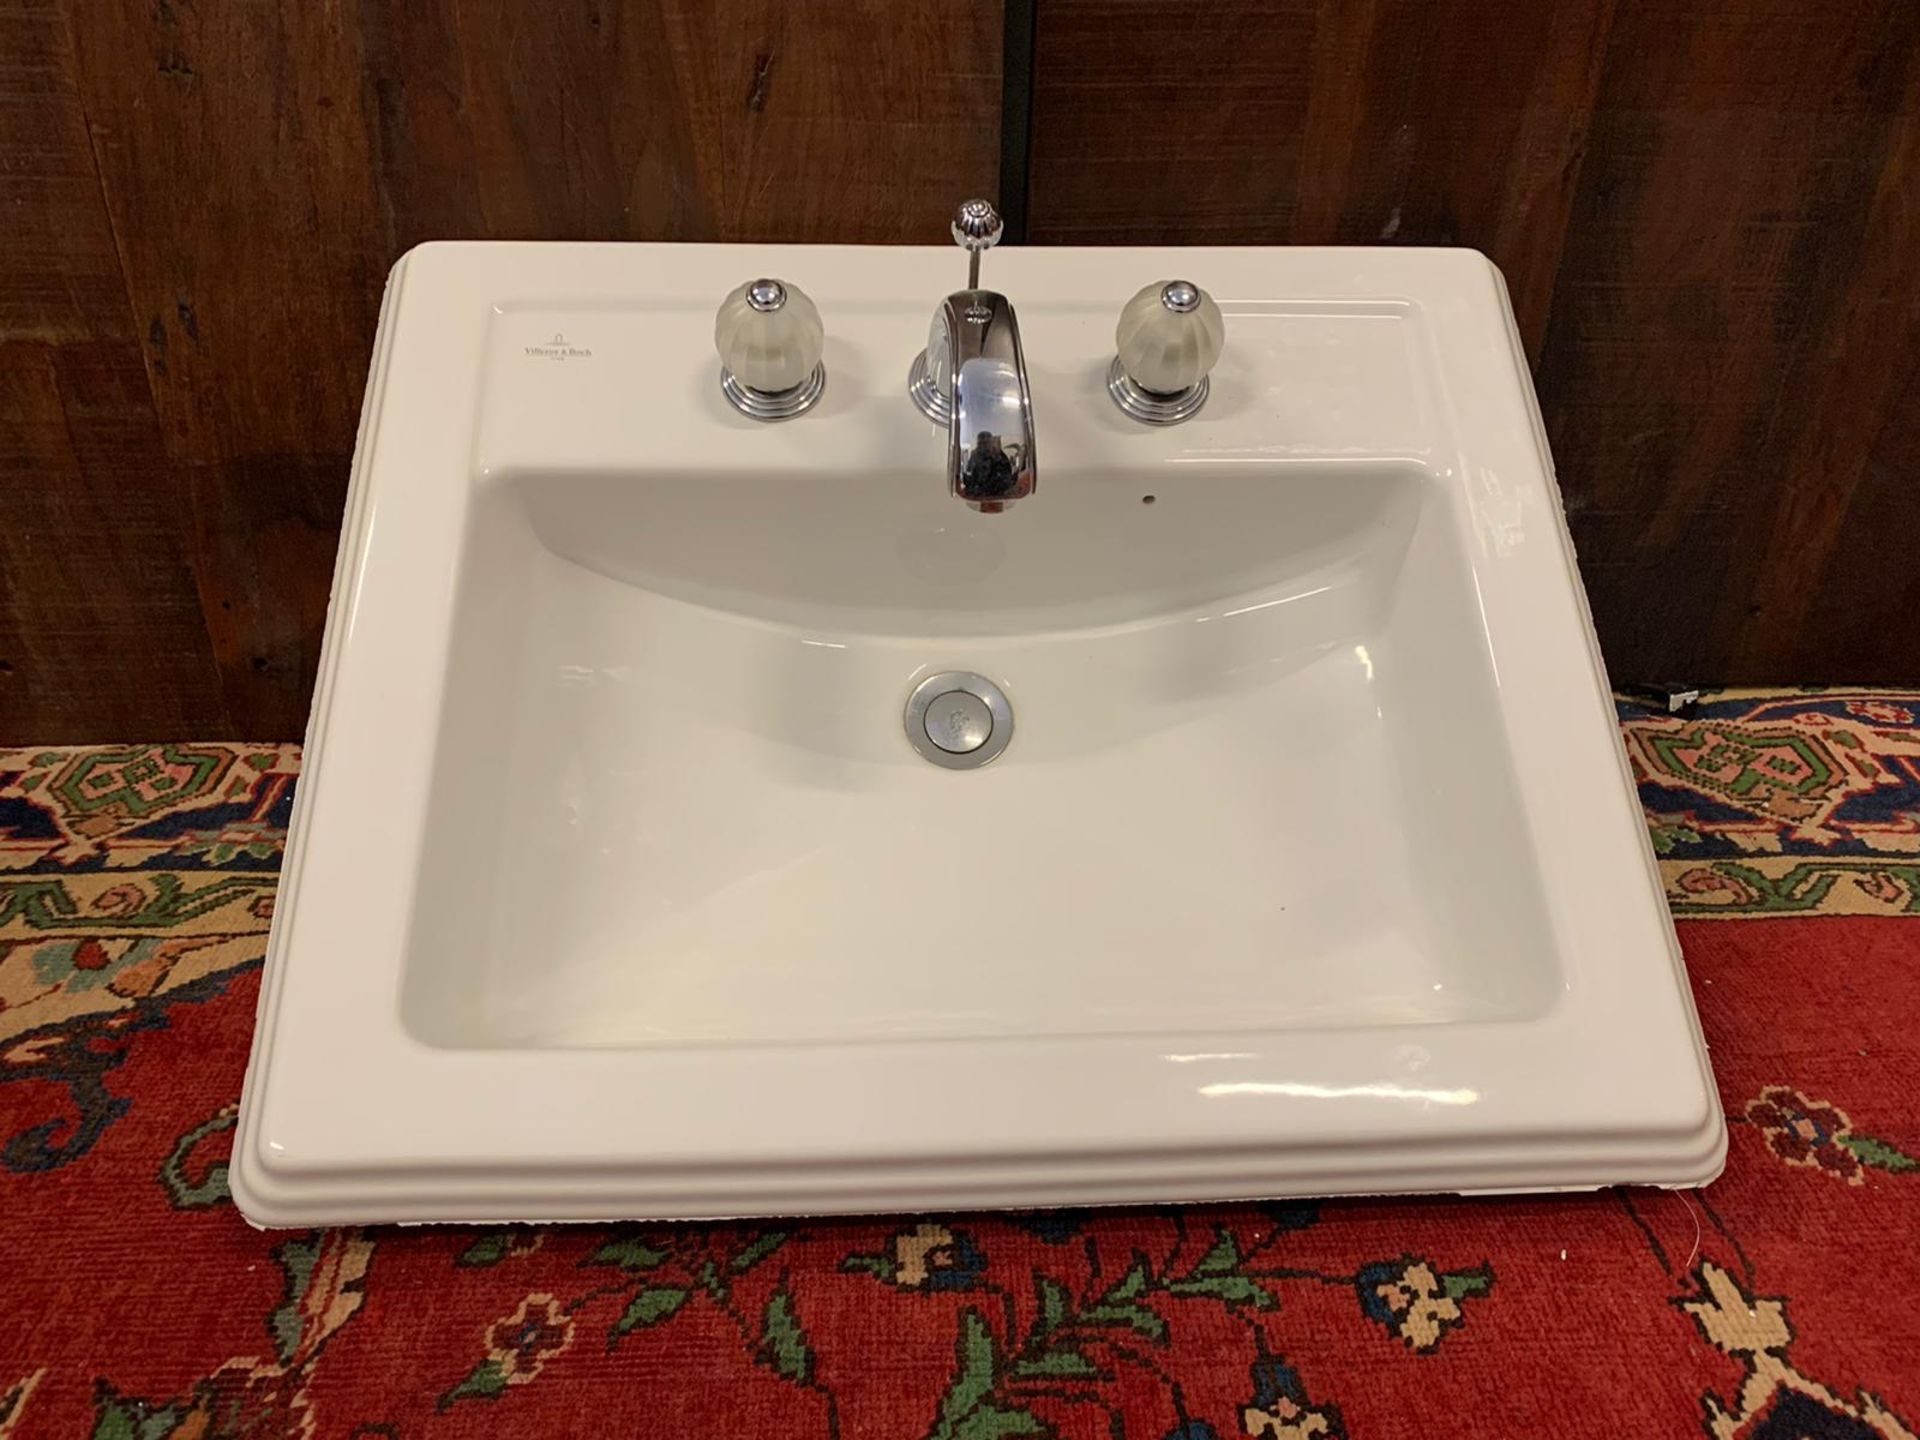 Villeroy & Boch Handwash Basin With Luxury Faucet Taps By Jean-Claude Delepine In Collaboration